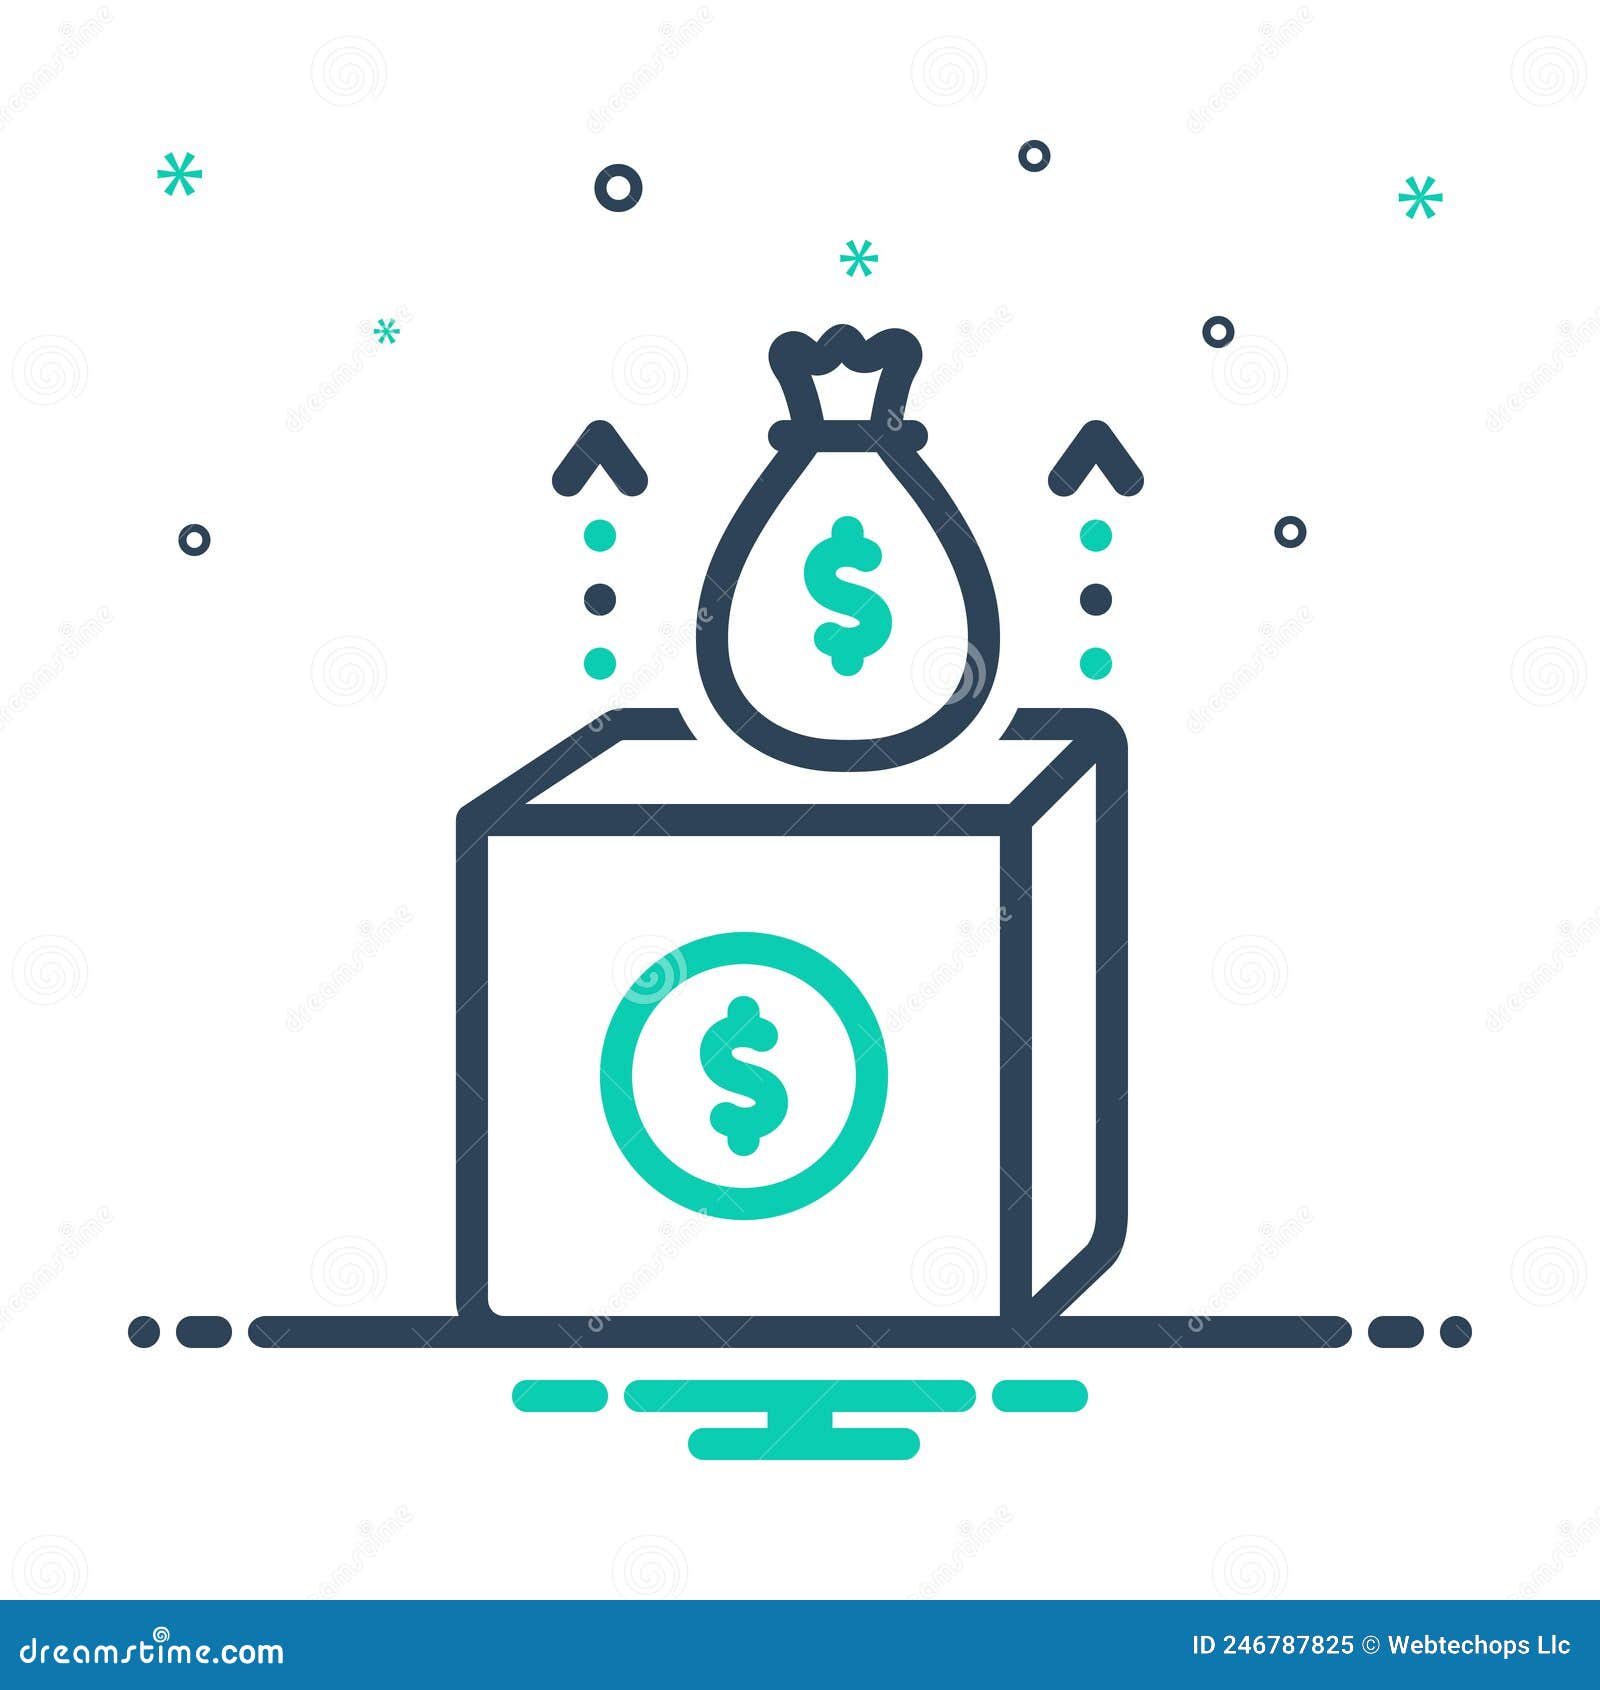 mix icon for revenue, income and proceeds